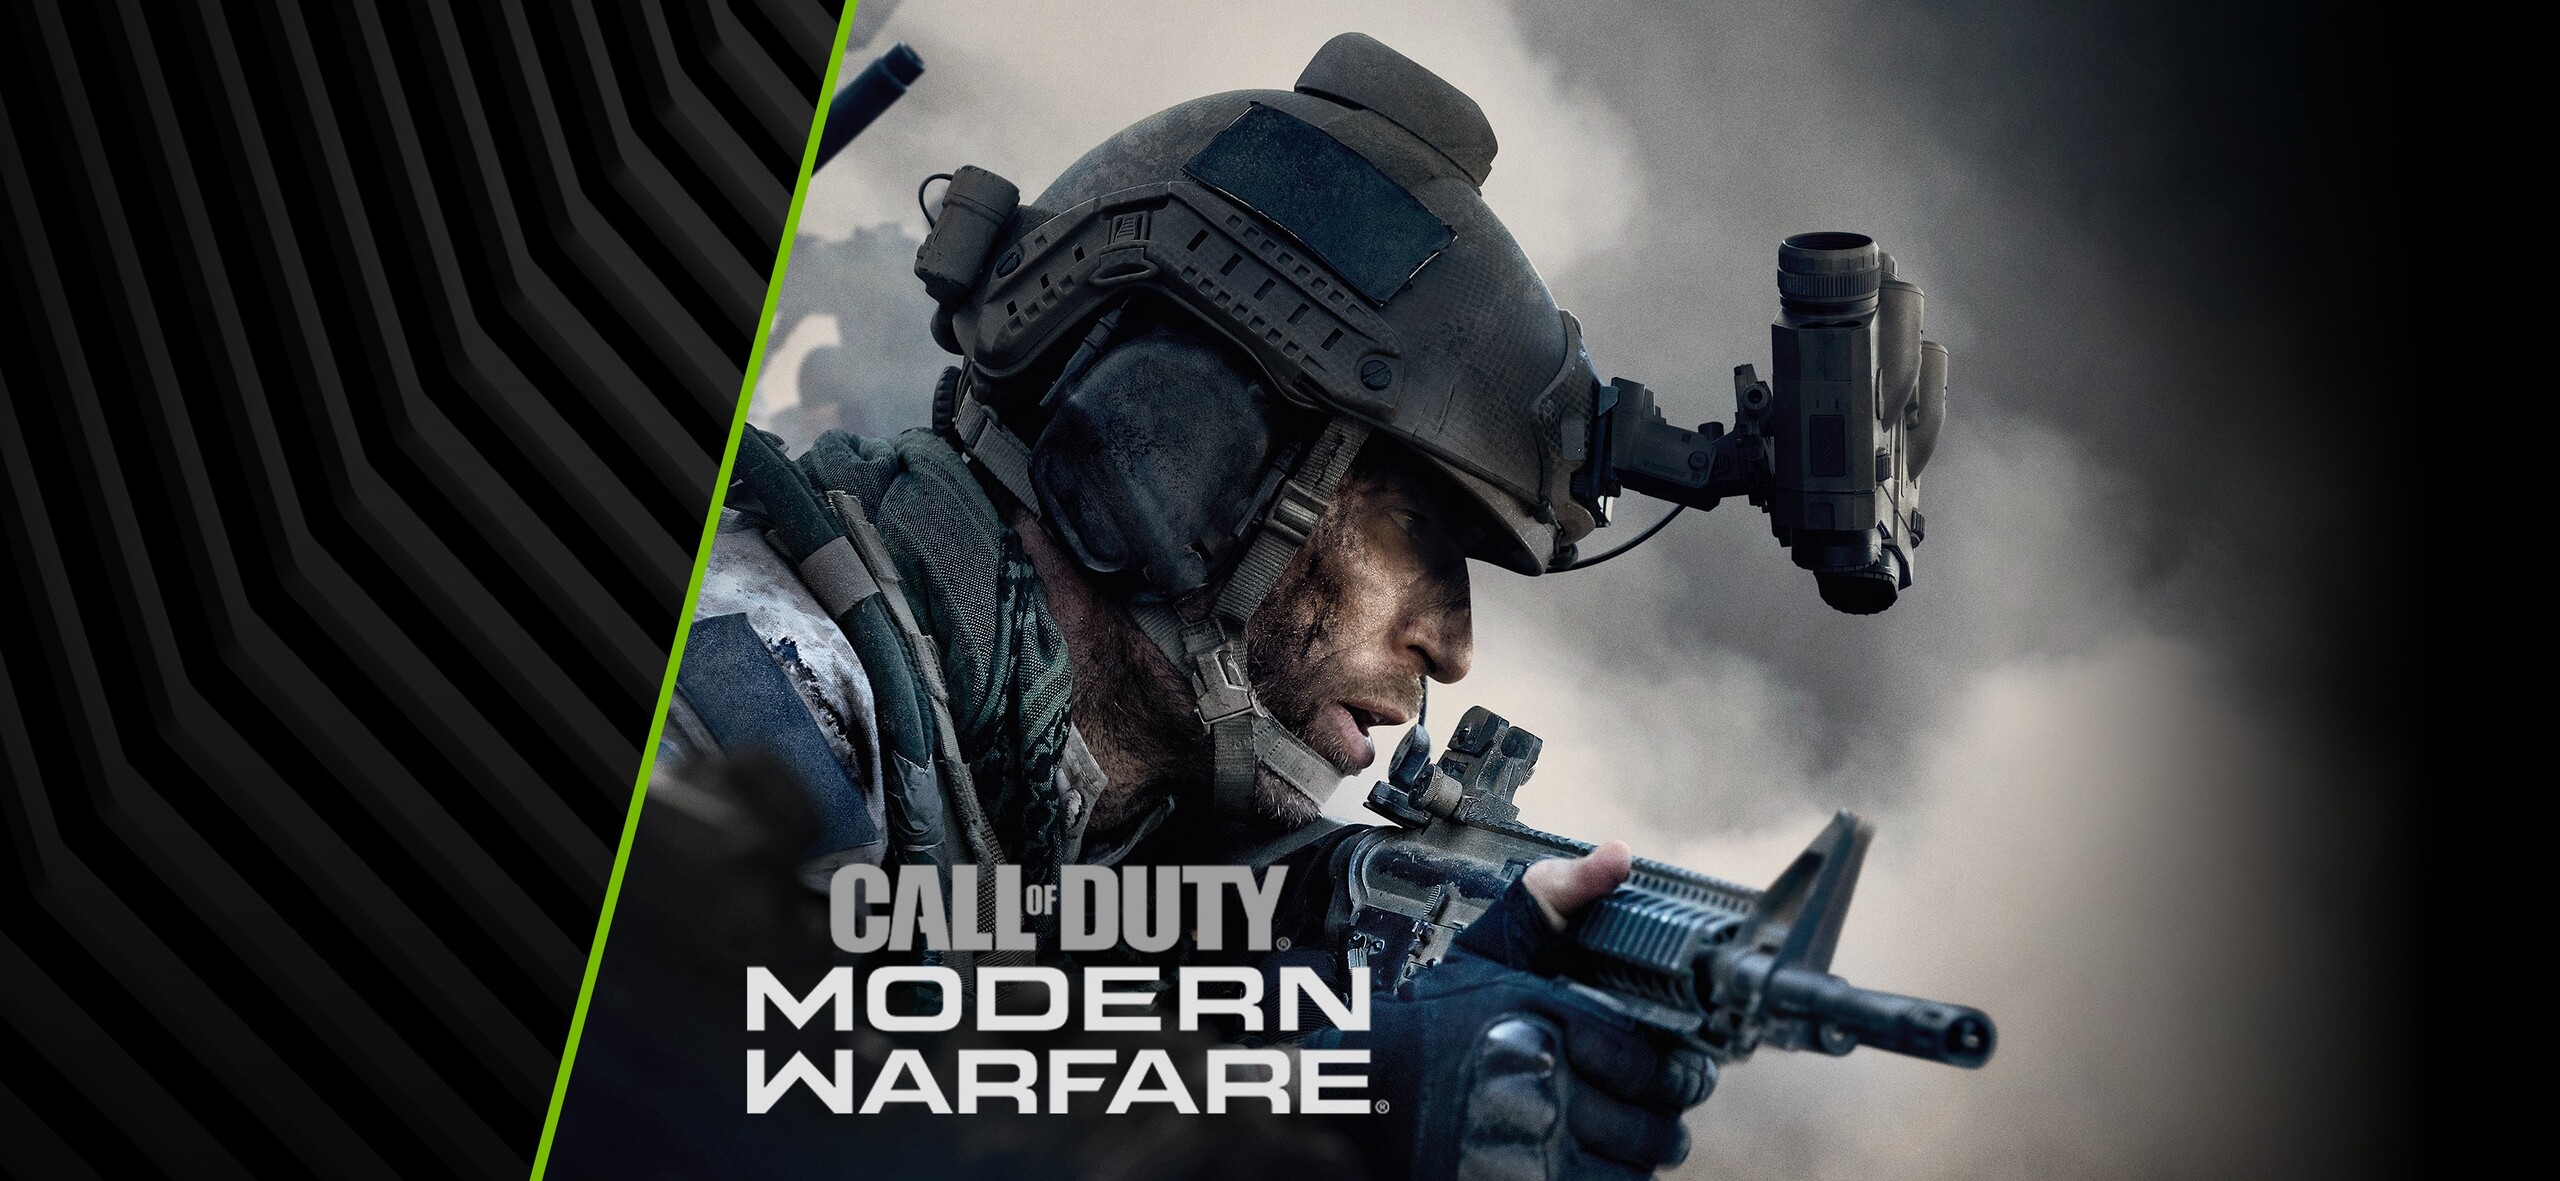 The chance bundle Call of Duty: Modern Warfare with a new RTX card will be gone soon - NotebookCheck.net News